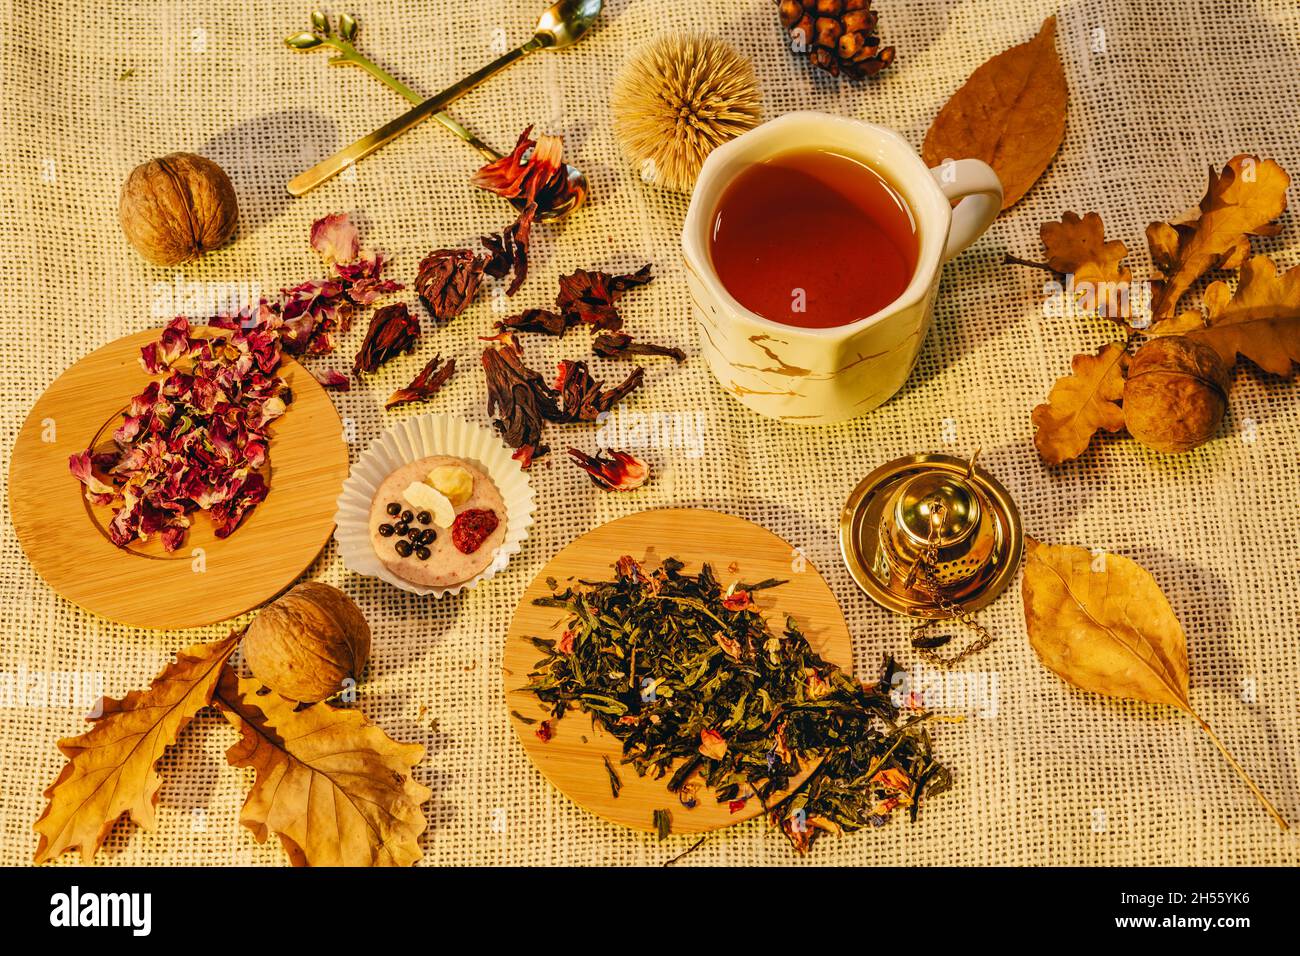 Autumn still life with dried tea leavs nuts and cup of tea. Warm autumn mood with autumn leaves Stock Photo